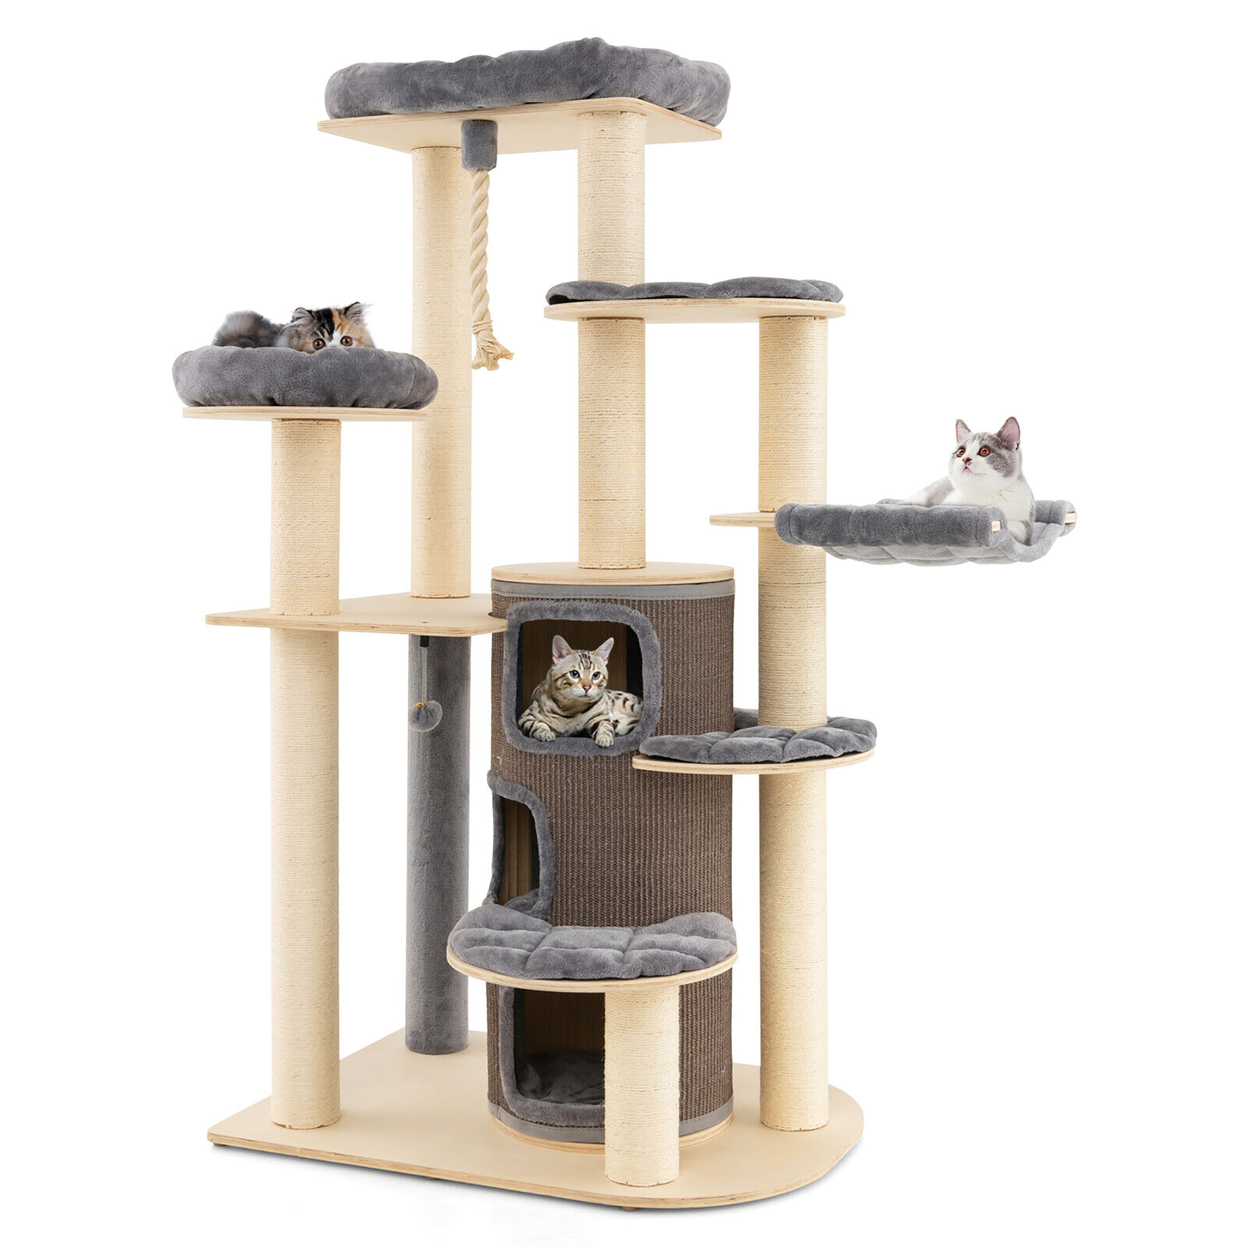 Wooden Cat Tree Multi-Level Kitten Tower W/ Condo Perches Scratching Posts - Grey